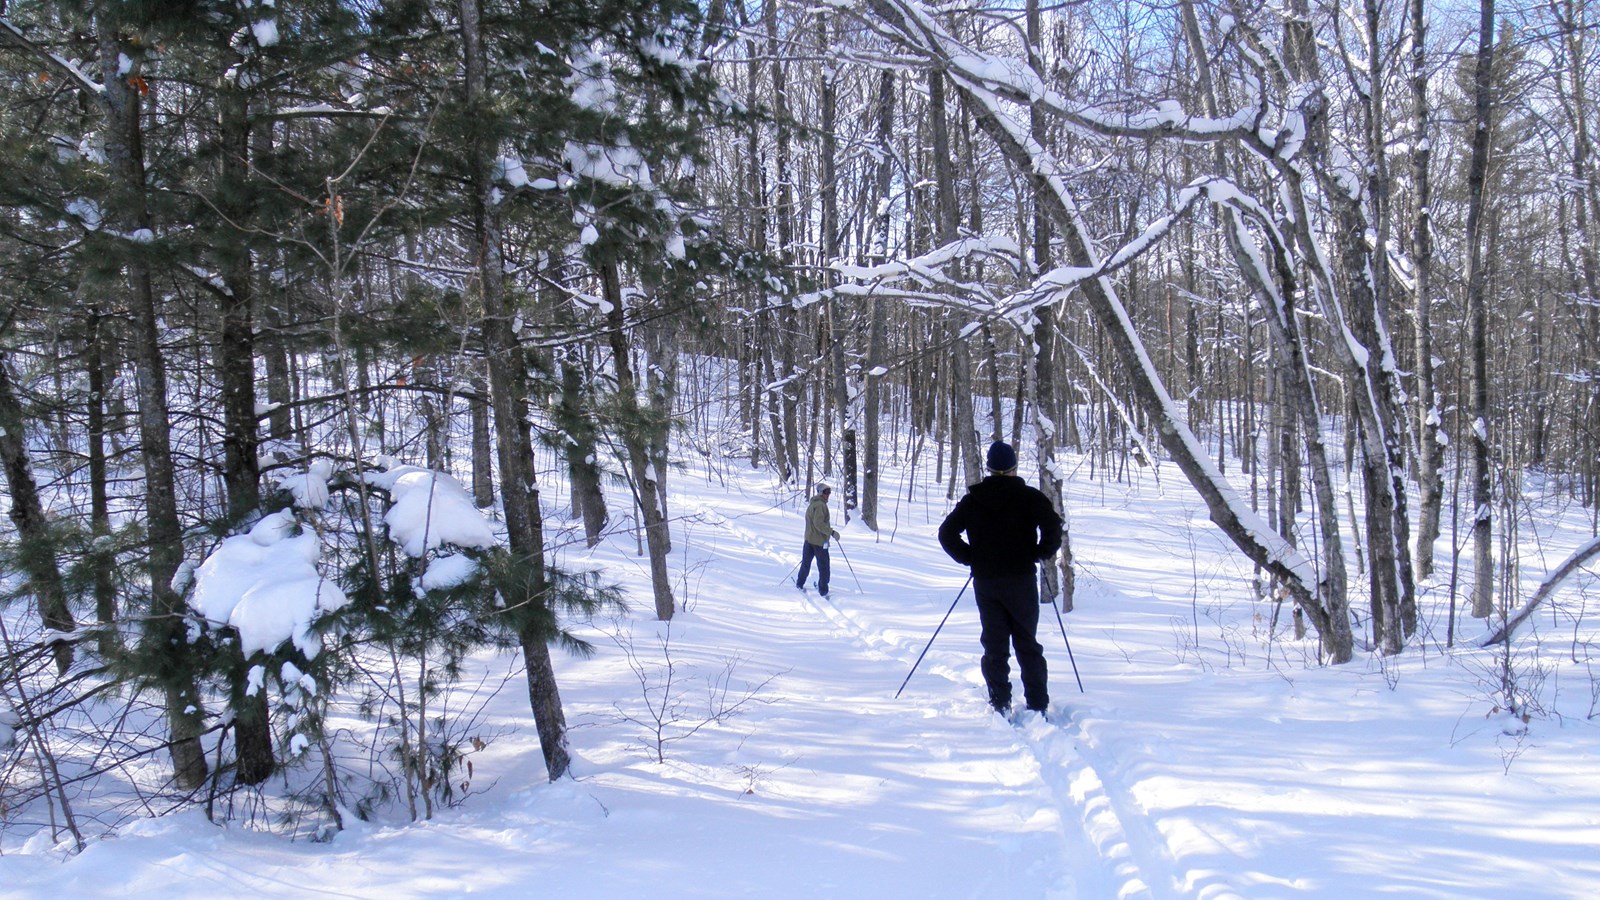 Two skiers make a trail through snow covered woods